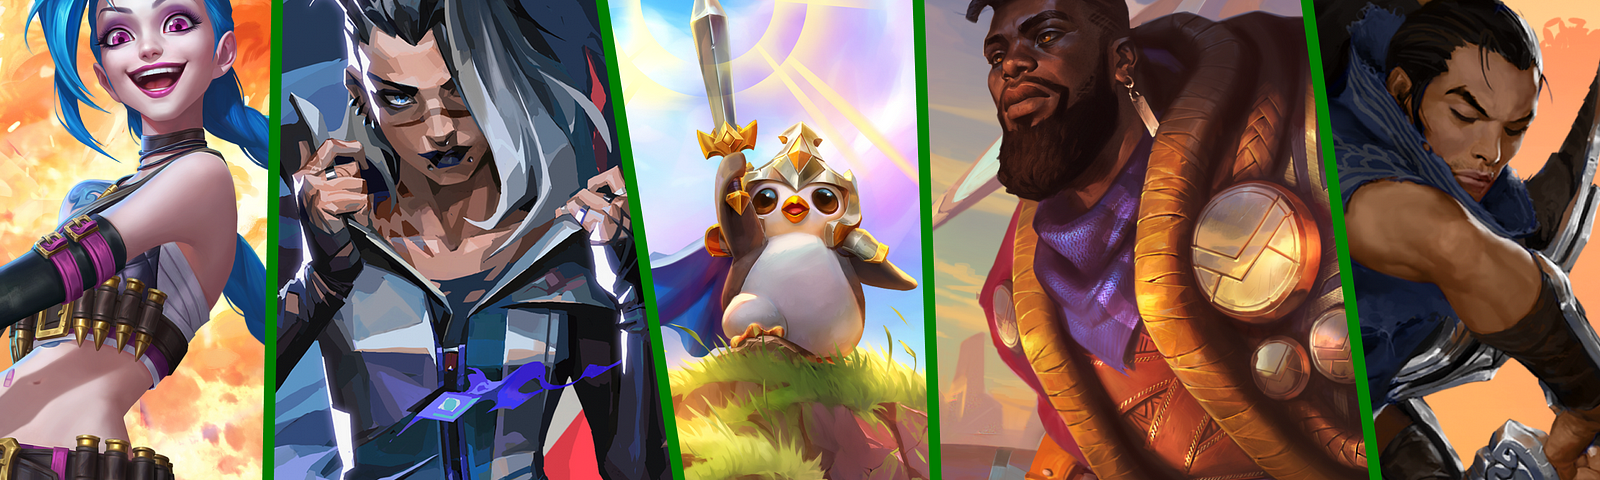 The key art for the Riot Games + Xbox Game Pass partnership. Shown from left to right are Jinx (from League of Legends: Wild Rift, Fade (from VALORANT), Pengu (from Teamfight Tactics), K’sante (in League of Legends), and Yasuo (in Legends of Runeterra).